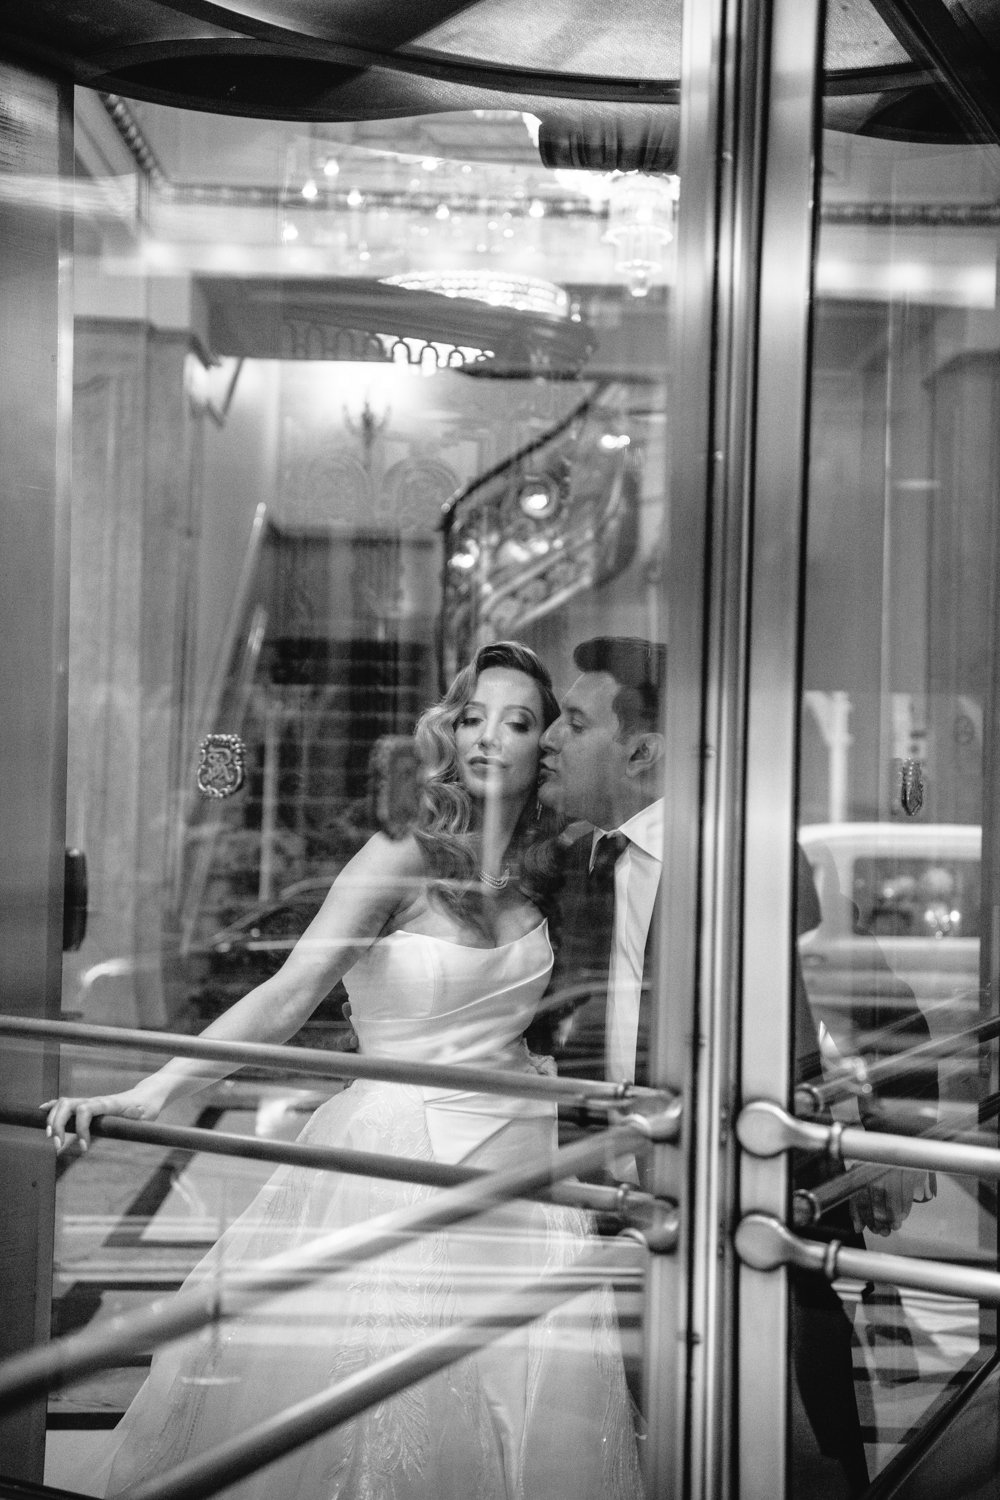 Groom kisses bride on cheek as they stand on the inside of a glass door. They are photographed from outside the building.

Manhattan Luxury Wedding. New York Luxury Wedding Photographer. Wedding in Manhattan. NYC Luxury Wedding.